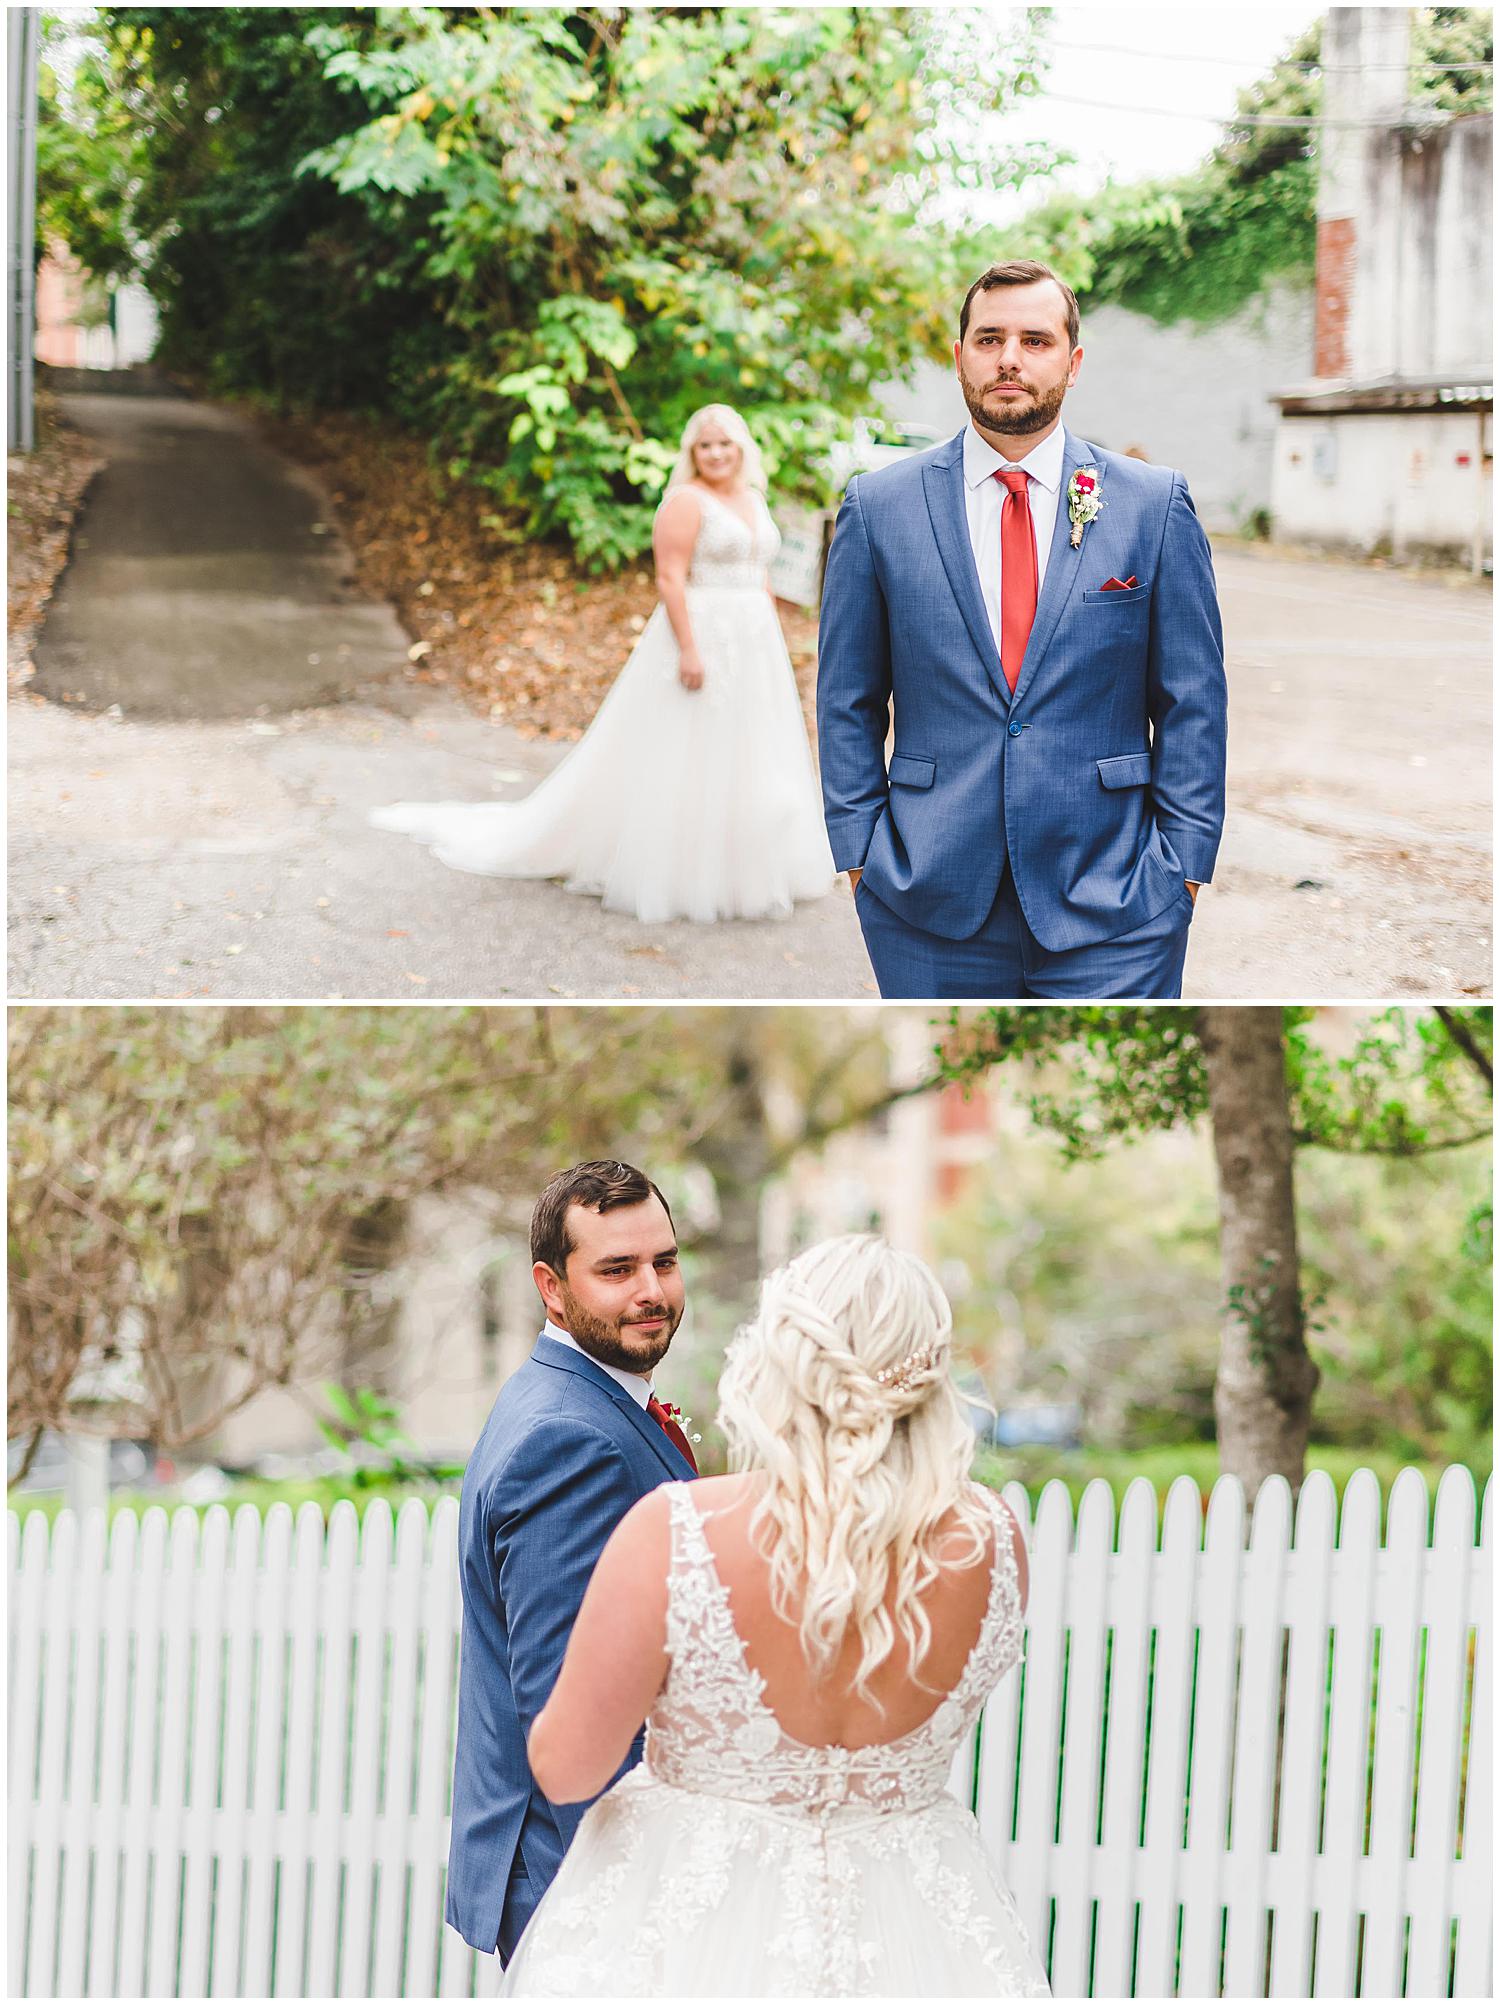 Charlotte wedding photographers capture emotional groom at first look with his bride